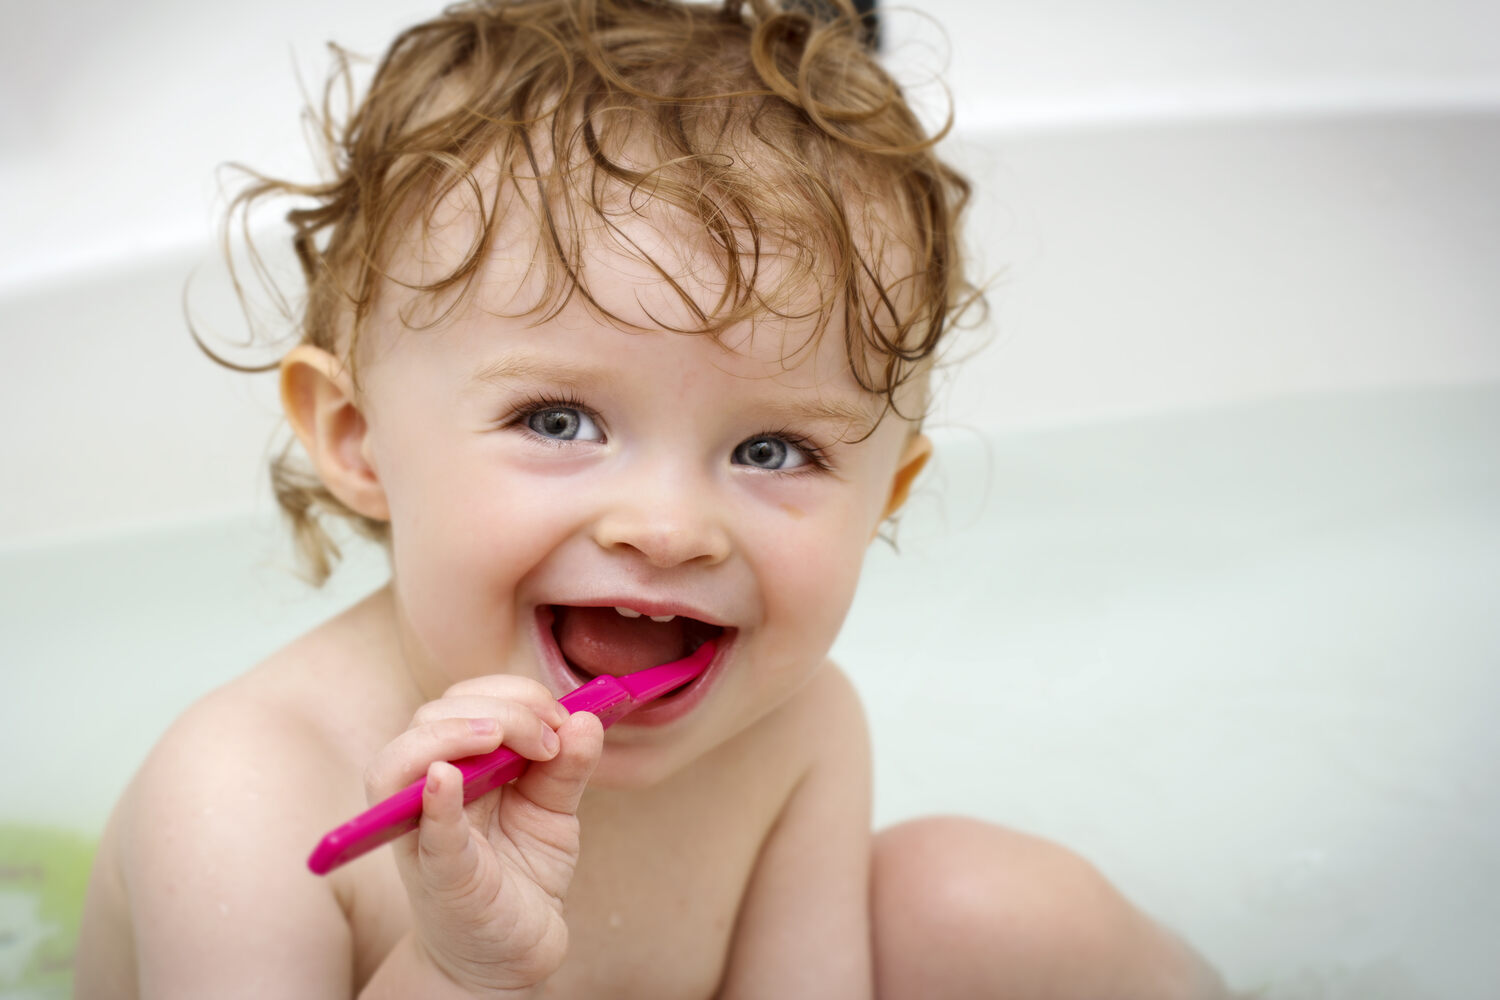 Regular brushing can help prevent tooth discoloration in toddlers